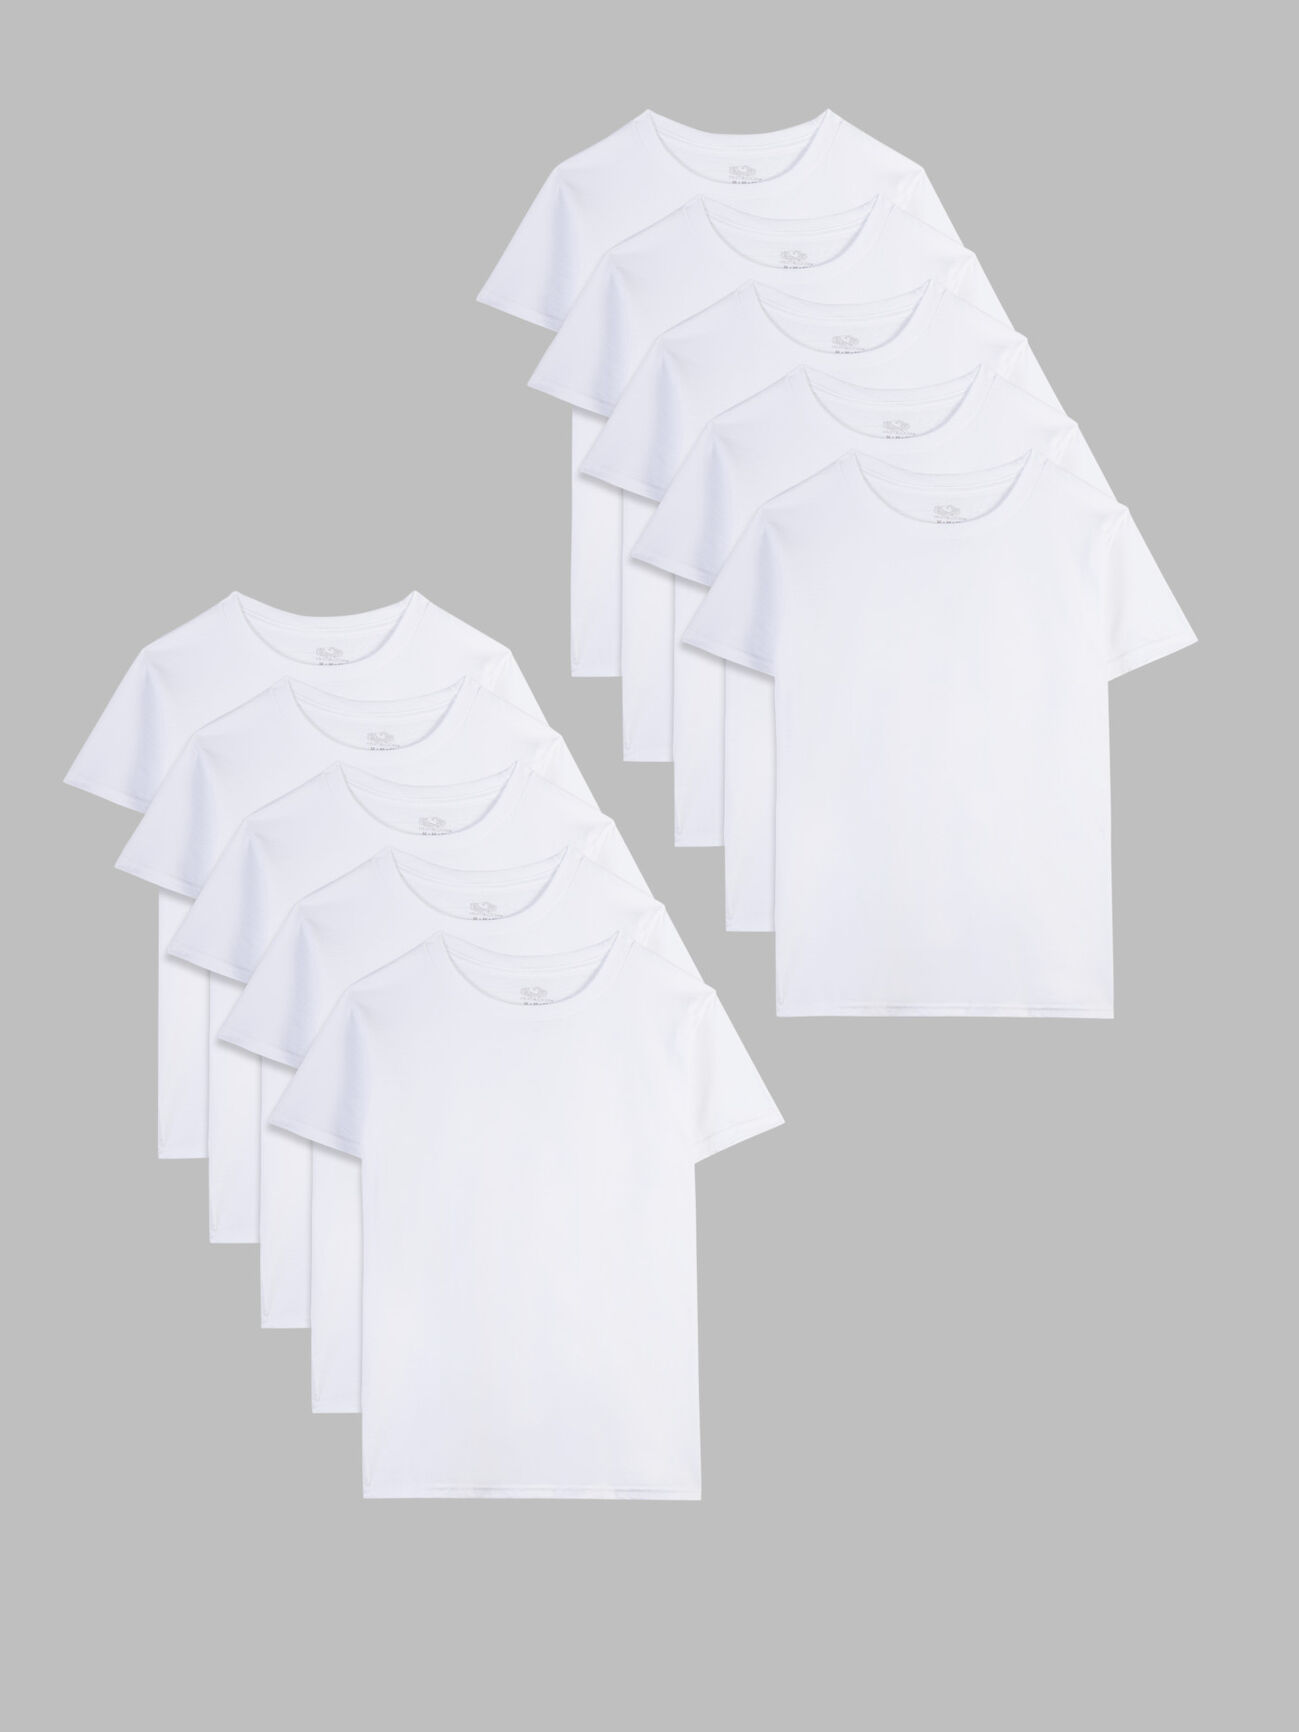 Toddler Boys’ Classic White Crew T-Shirts, 10 Pack